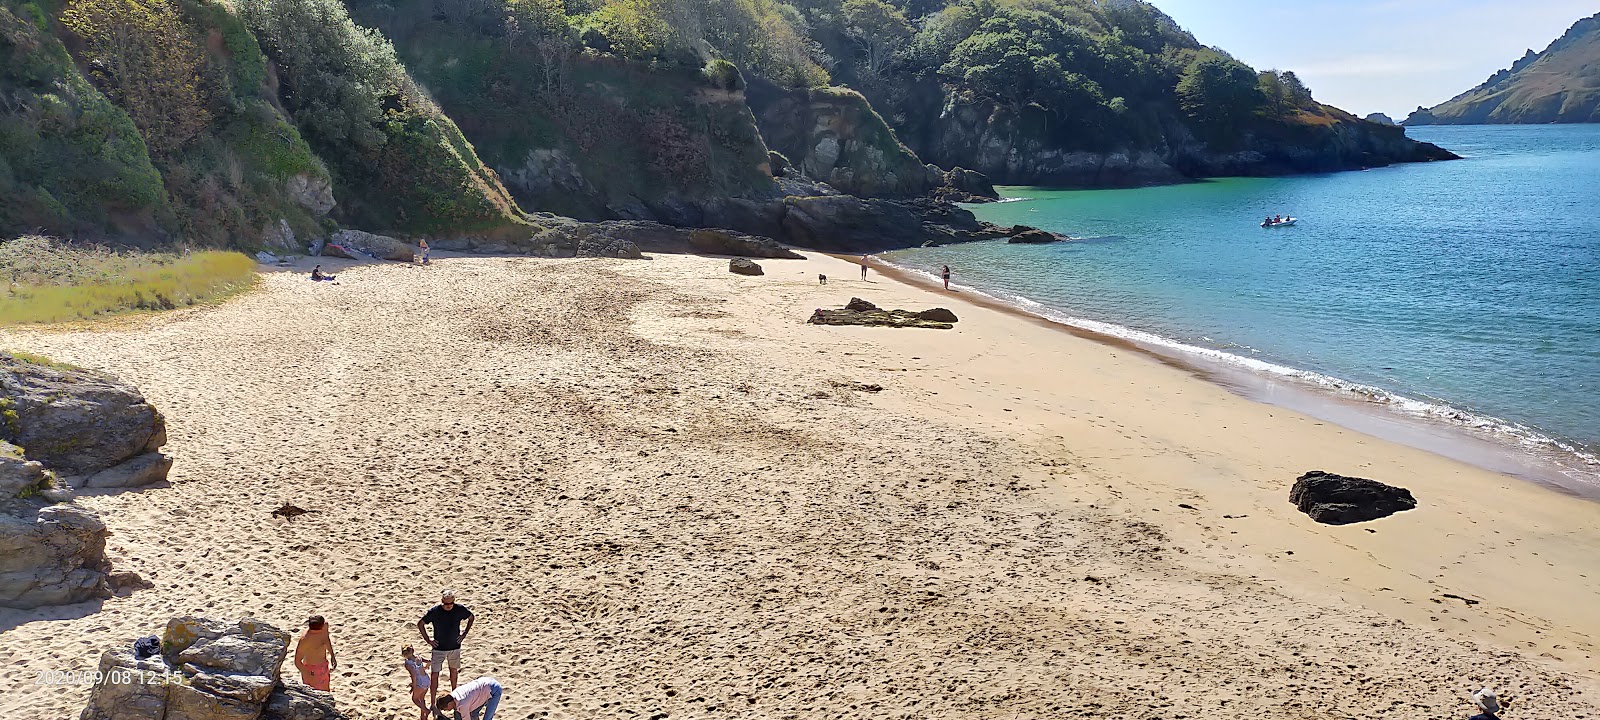 Photo of Sunny cove beach located in natural area